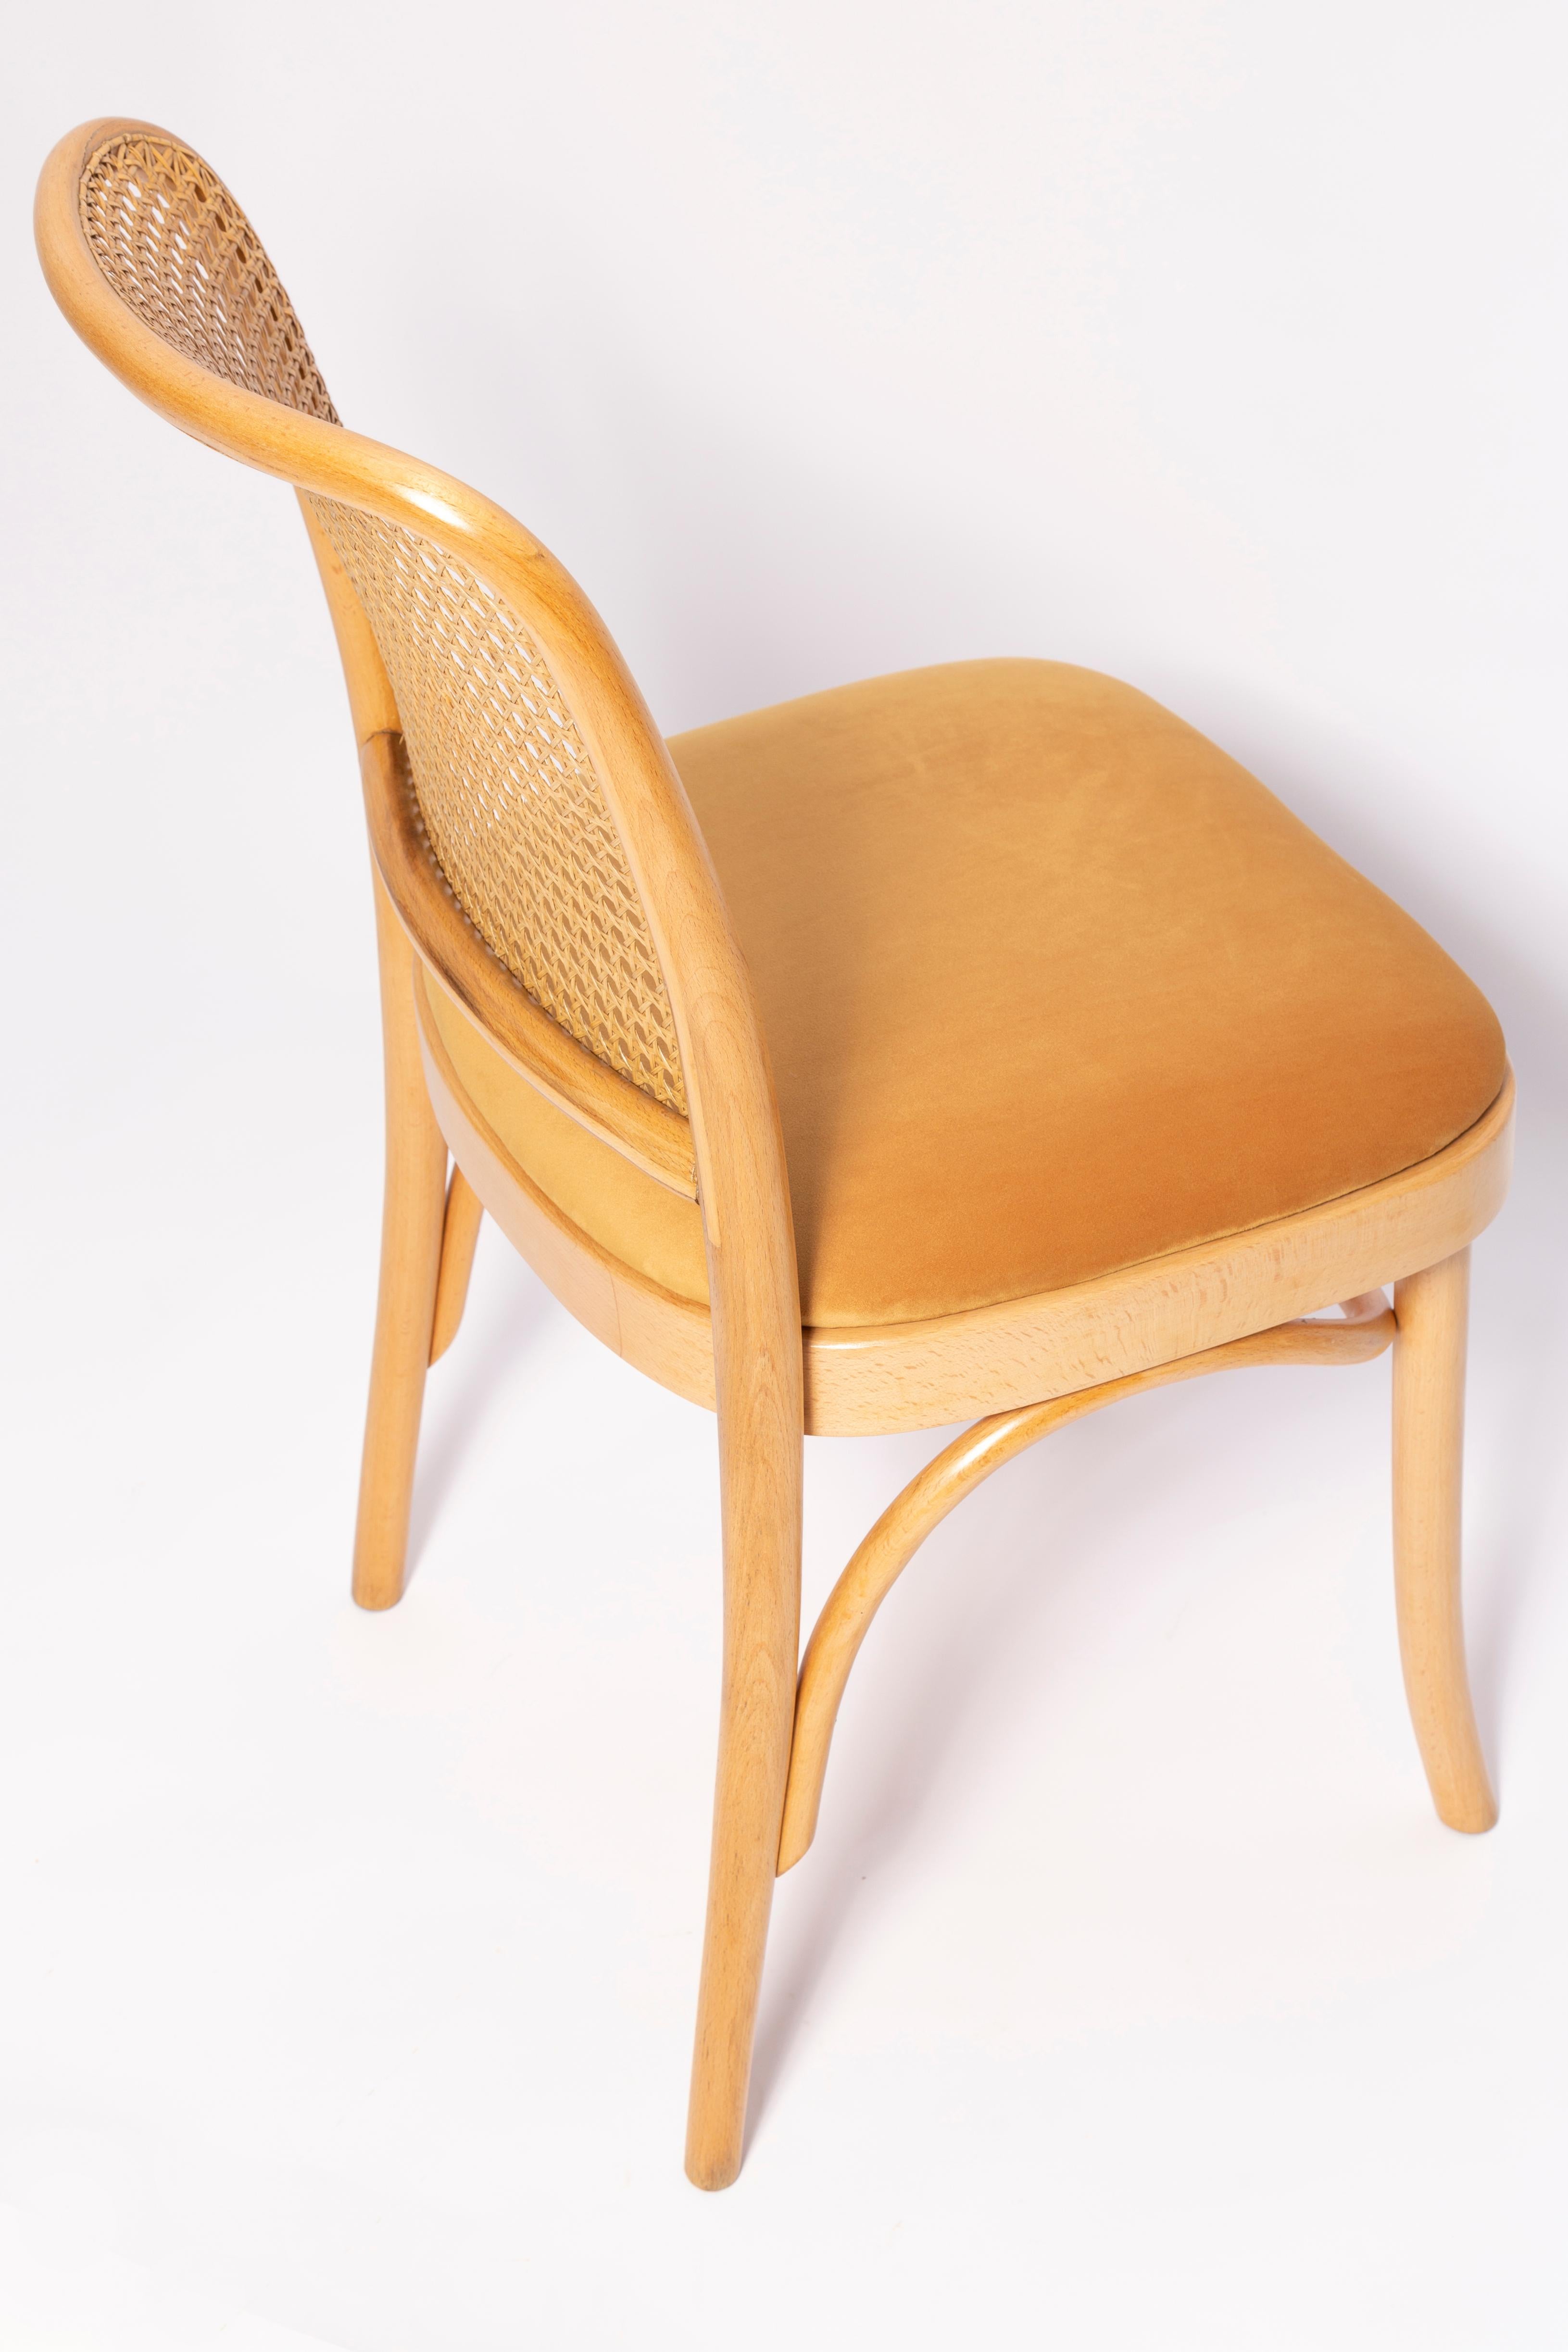 Set of Six Mid Century Yellow Velvet Thonet Wood Rattan Chairs, Europe, 1960s For Sale 3